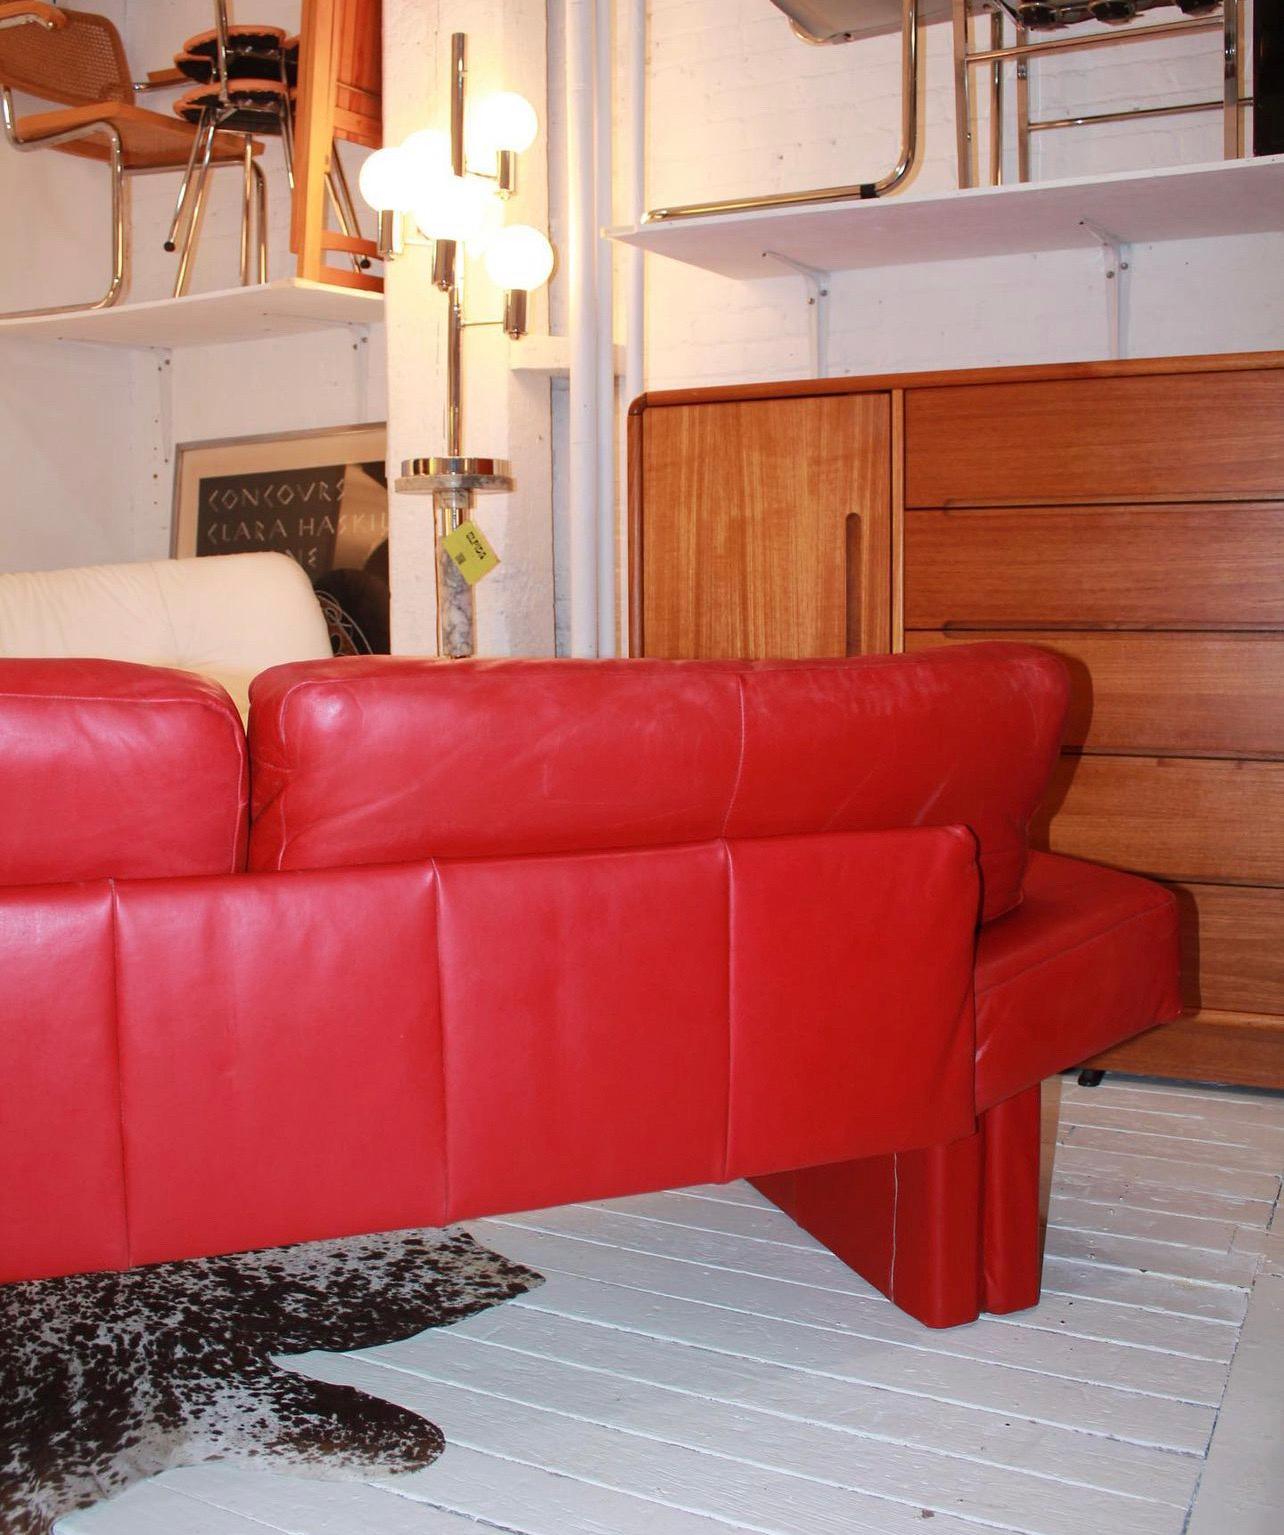 Post Modern Red Leather Sofa by Flep S.P.a. Bitonto, Made in Italy In Good Condition For Sale In Brooklyn, NY